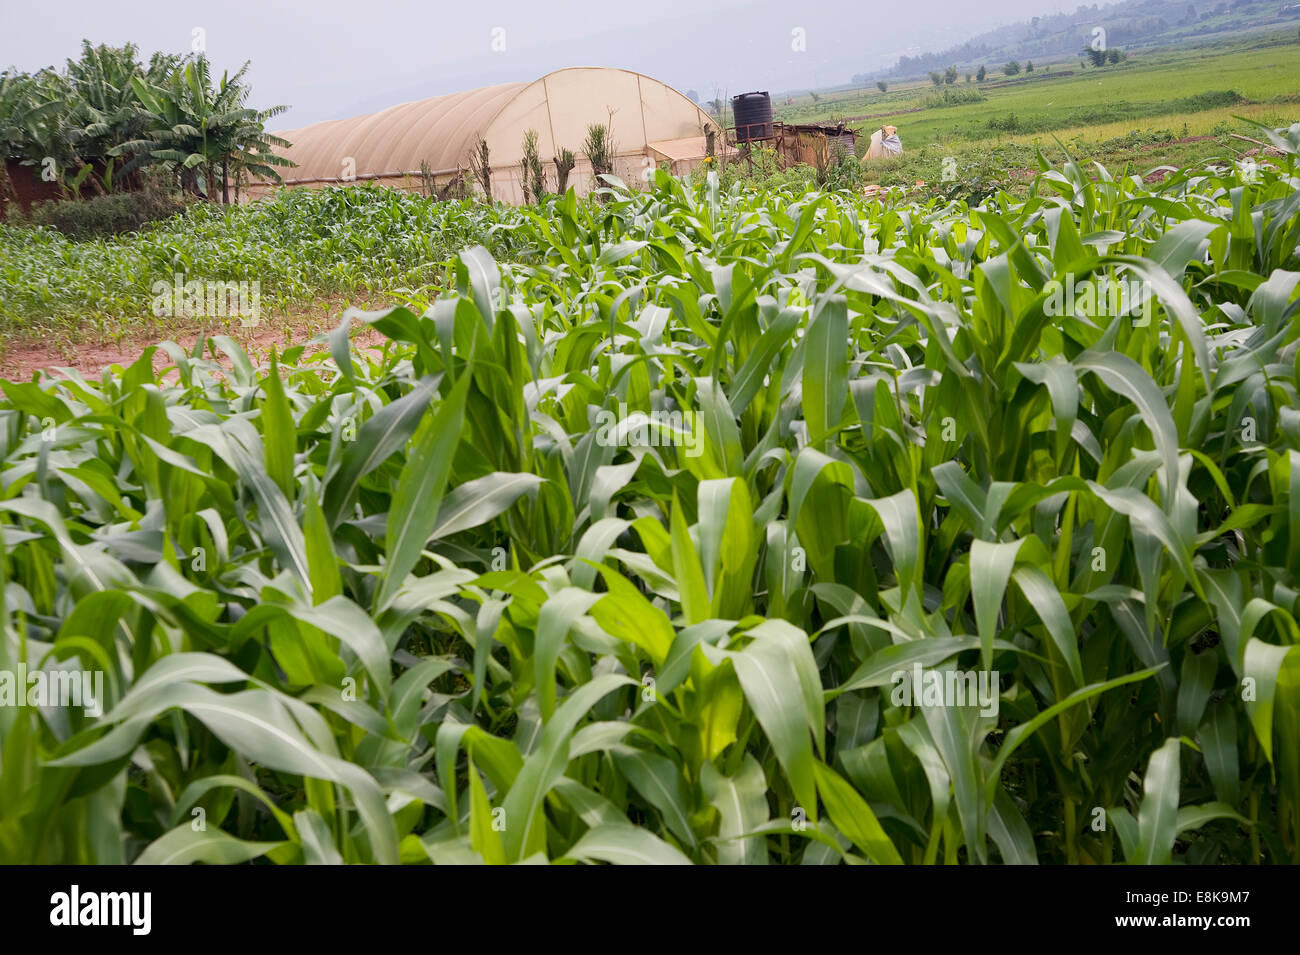 RWANDA, KIGALI: Around Kigali are many rice fields and also corn or vegetables fields. Many people work in agriculture. Stock Photo